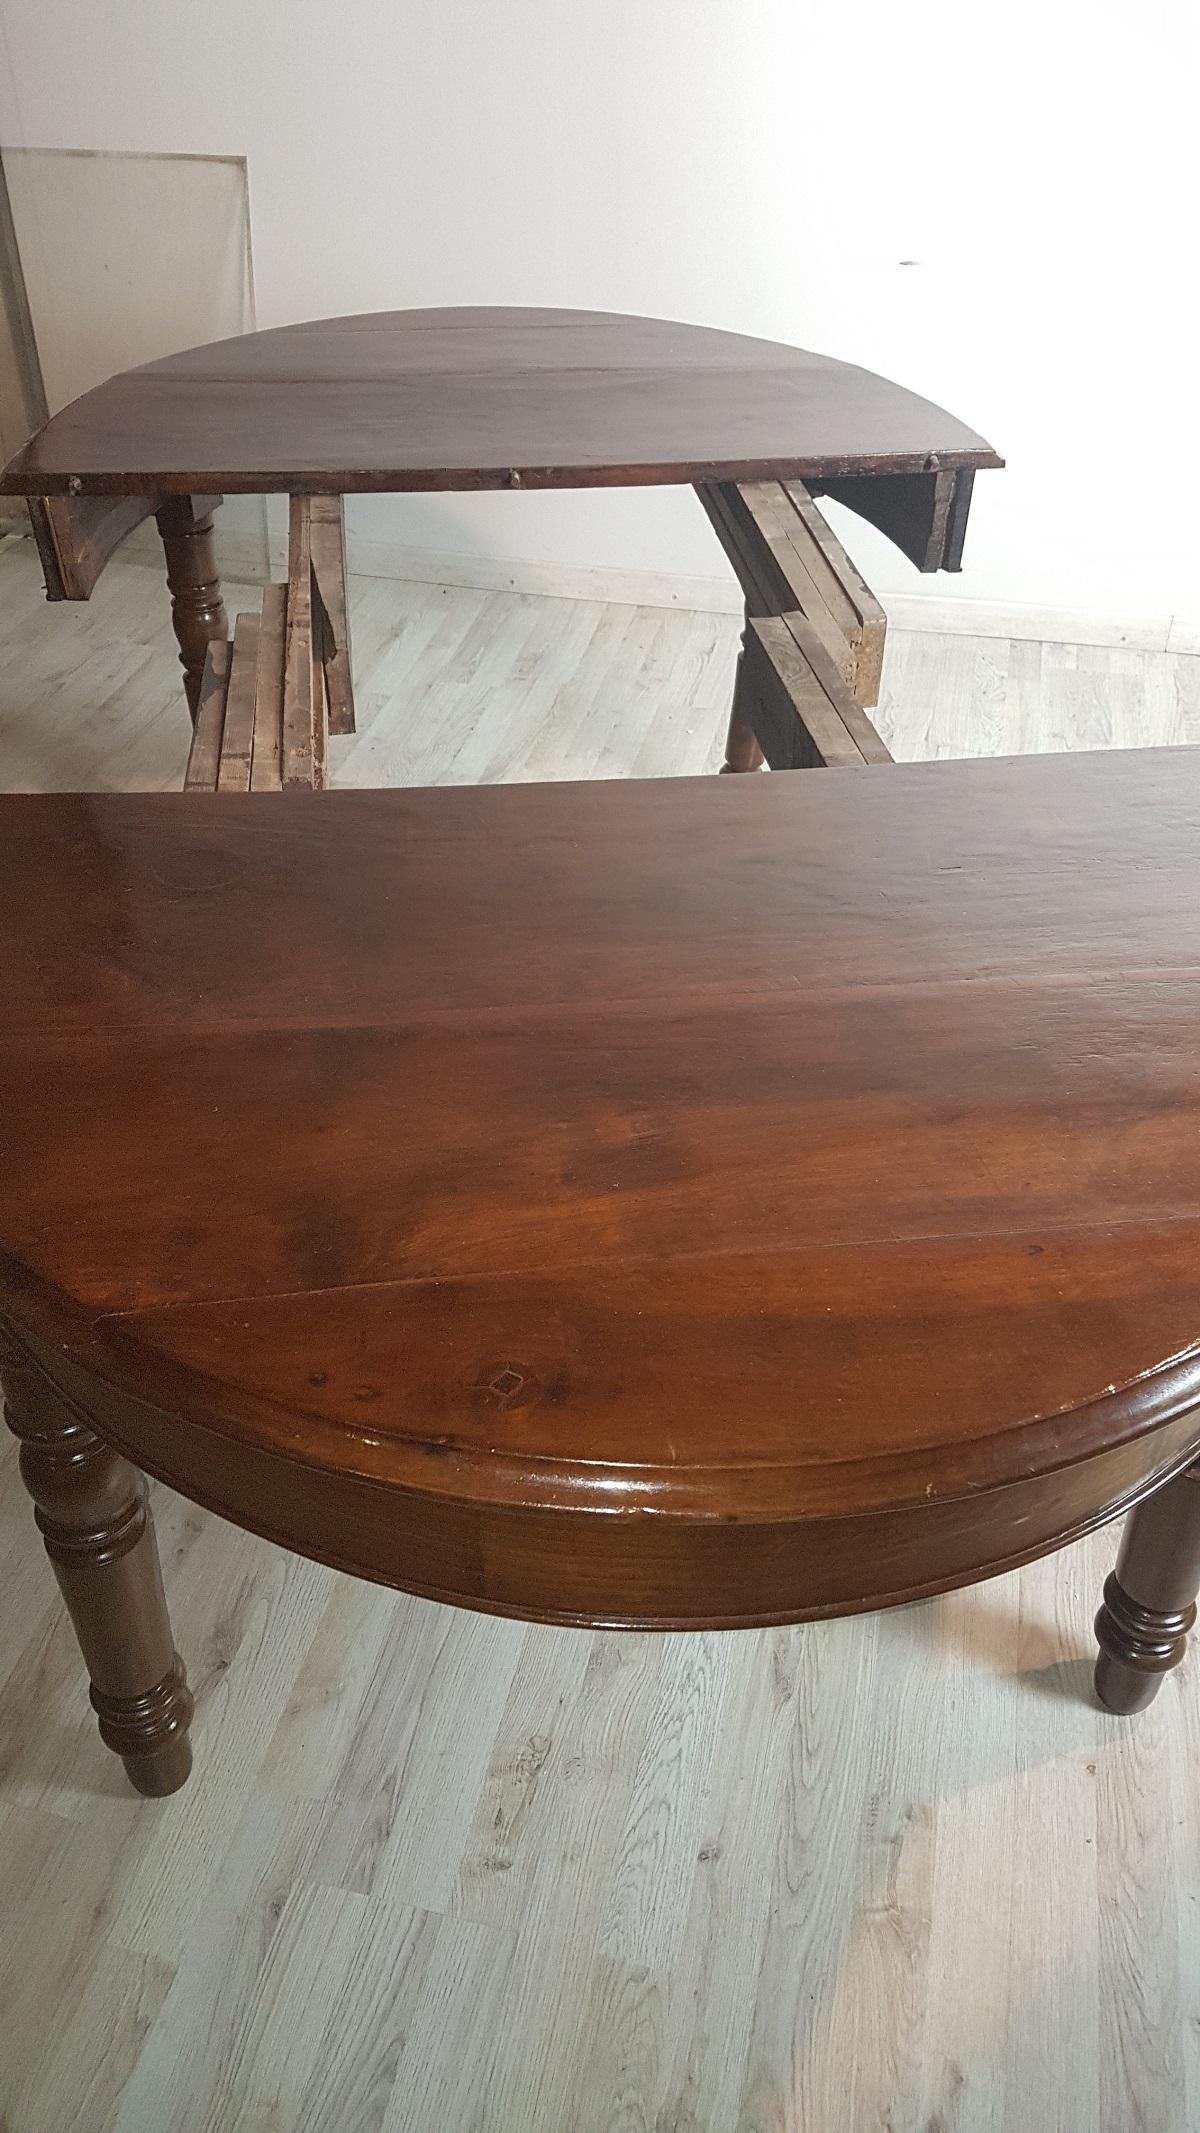 Elegant antique table ideal oval extensible dining room in the centre the table is dated around the first half of the 1800s in the middle of Charles X. The table is made of solid patina walnut, the band is narrow so convenient for use. The table is